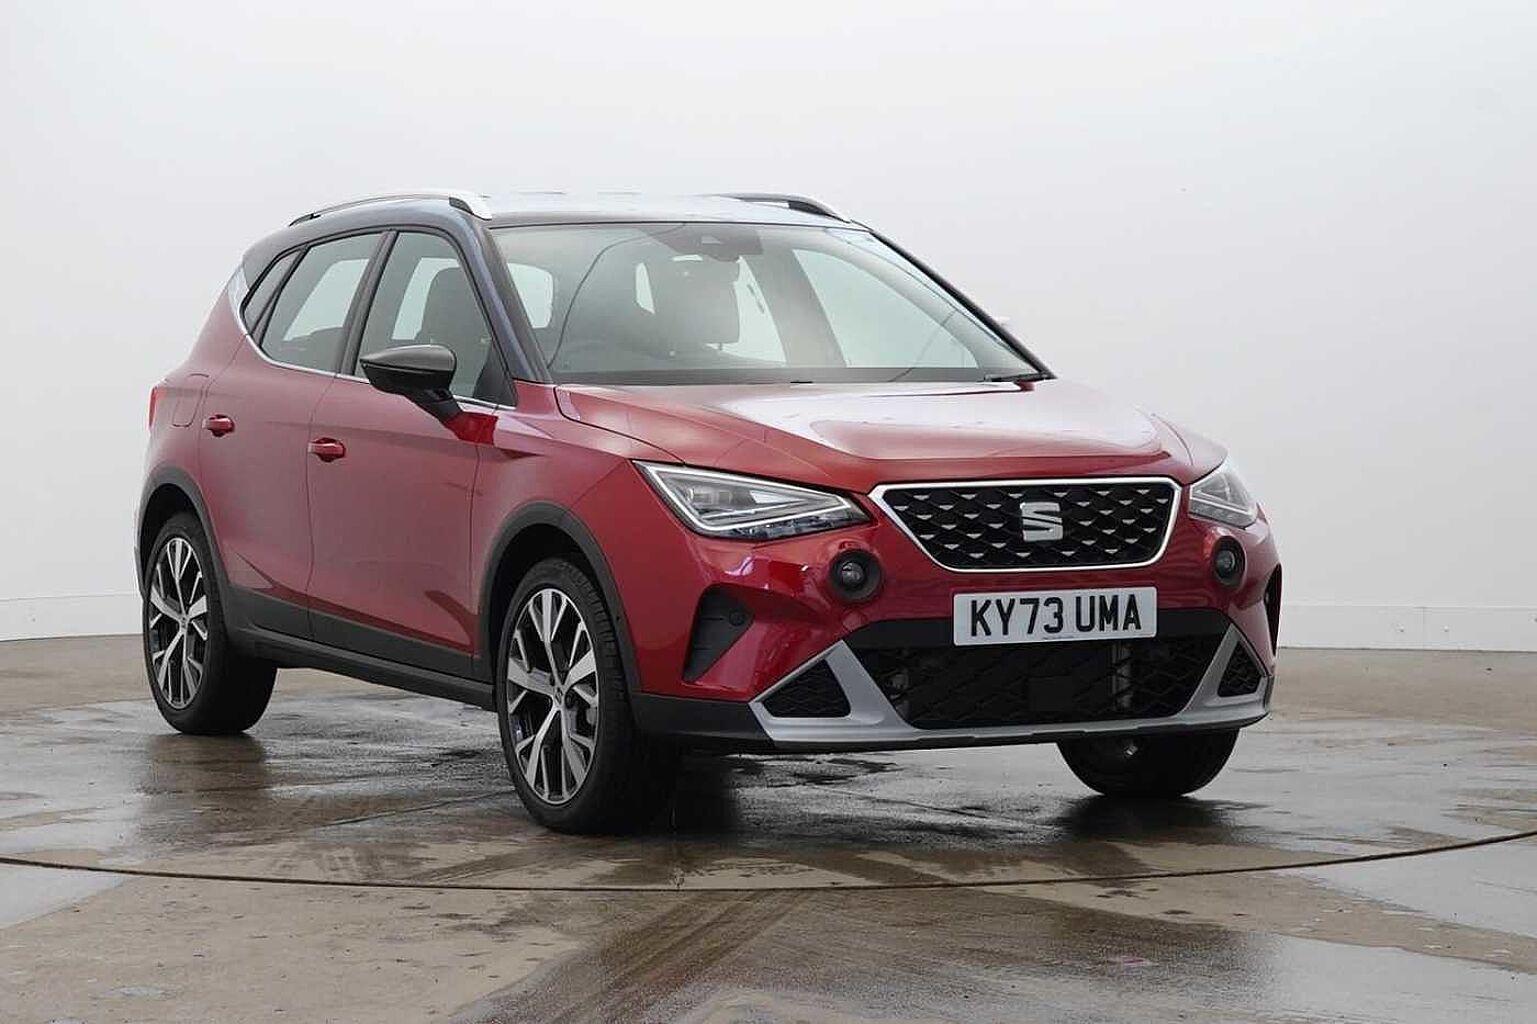 Find A Used Red SEAT Arona 1.0 TSI (110ps) XPERIENCE Lux DSG SUV 